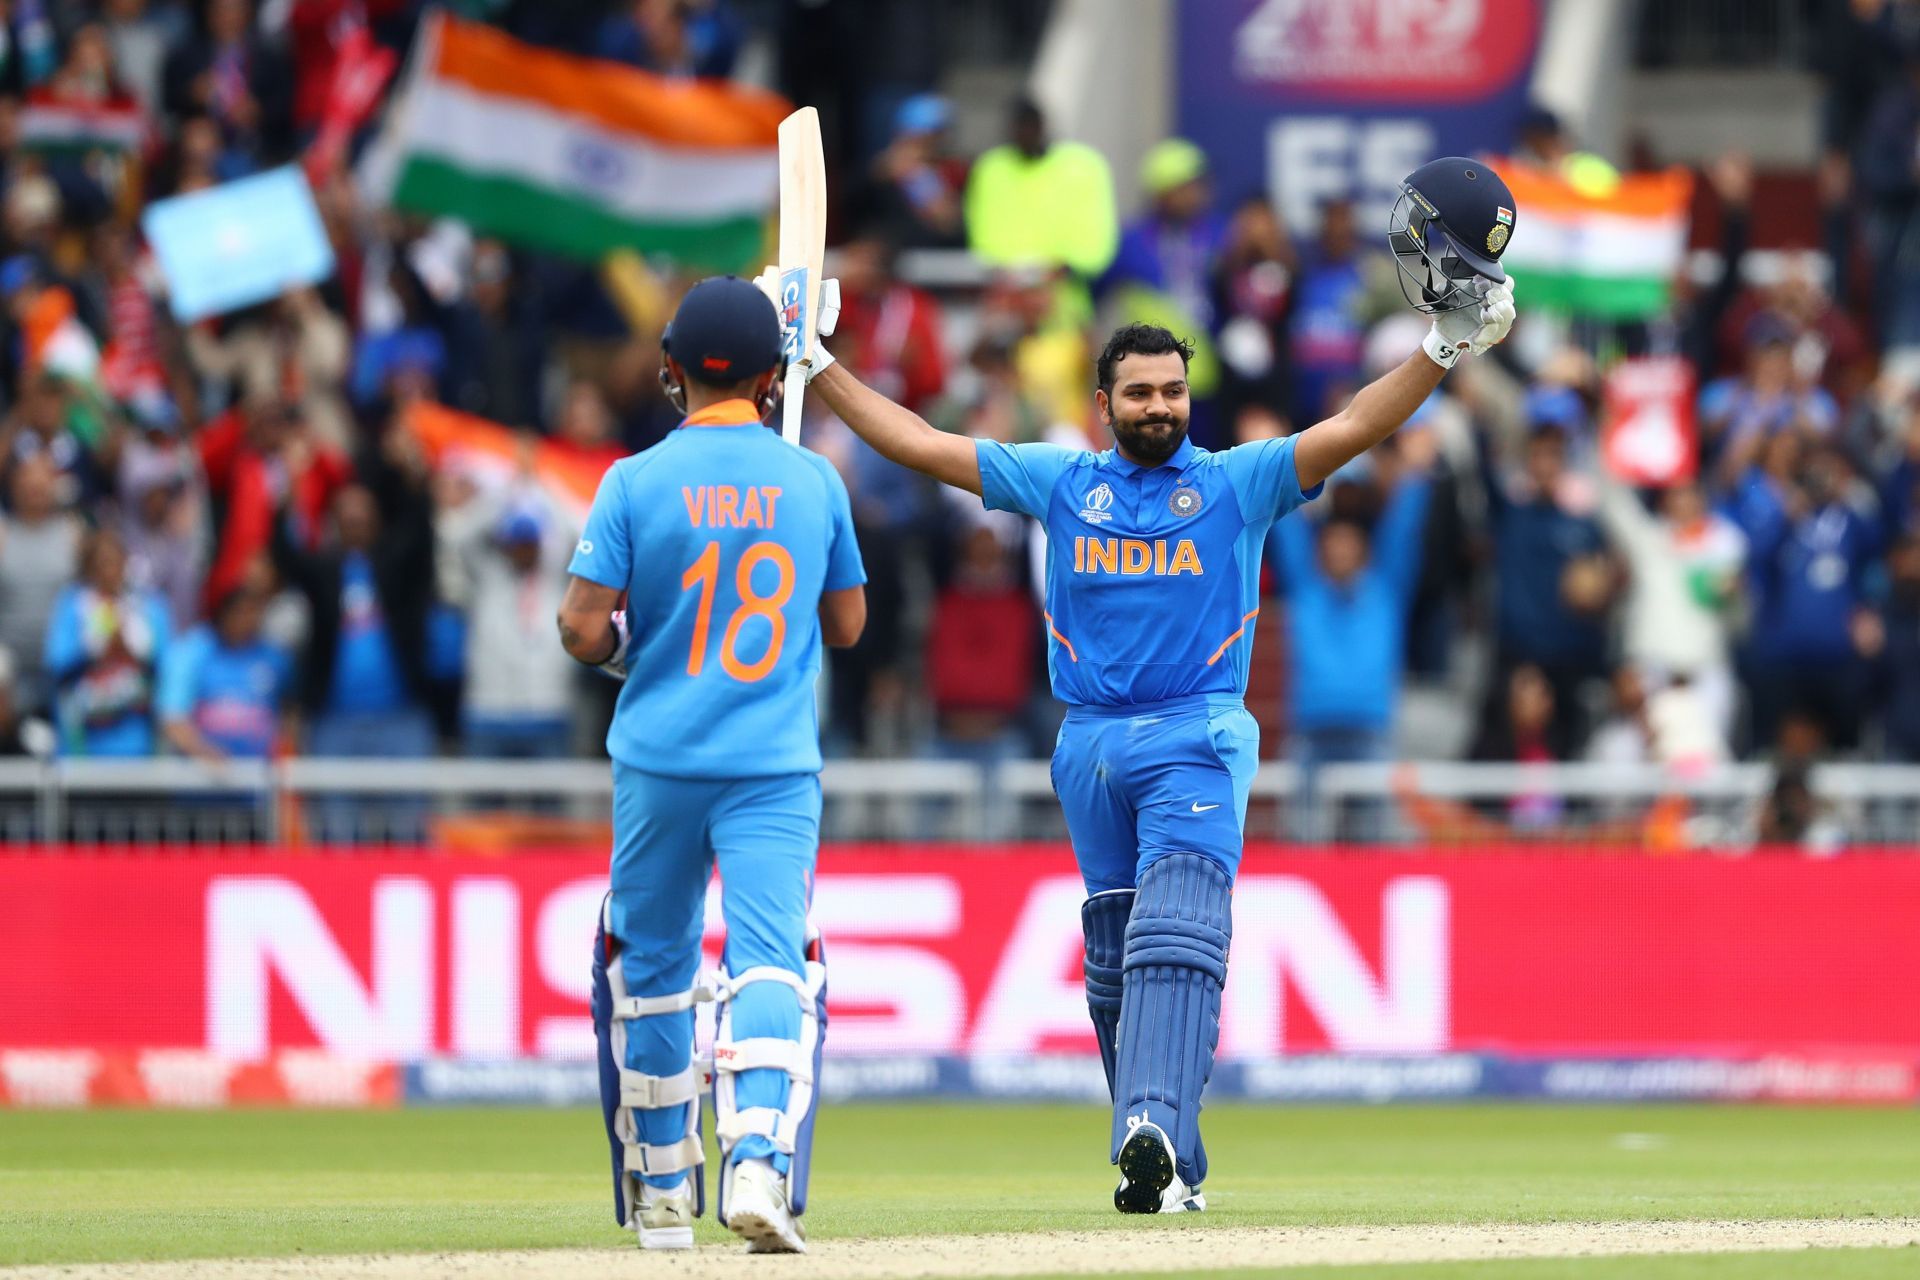 Rohit Sharma celebrates his hundred against Pakistan in the 2019 World Cup. (Pic: Getty Images)